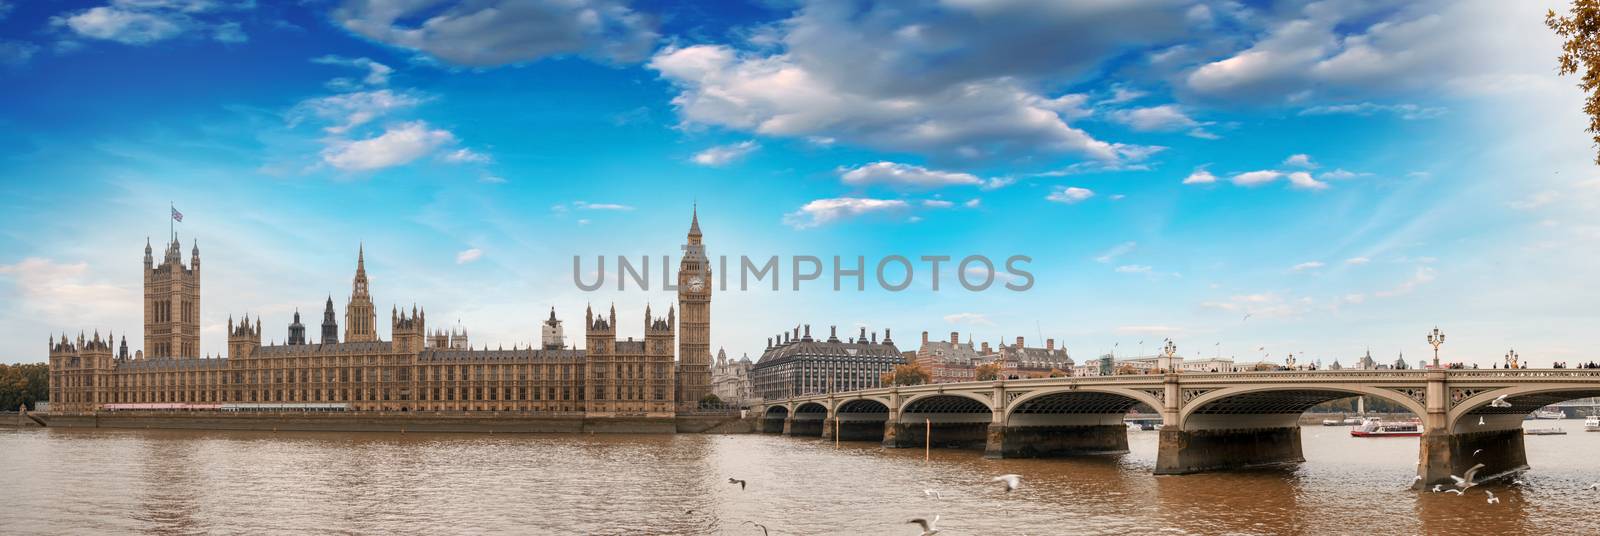 Westminster, London. View of Bridge and Houses of Parliament from across river Thames.